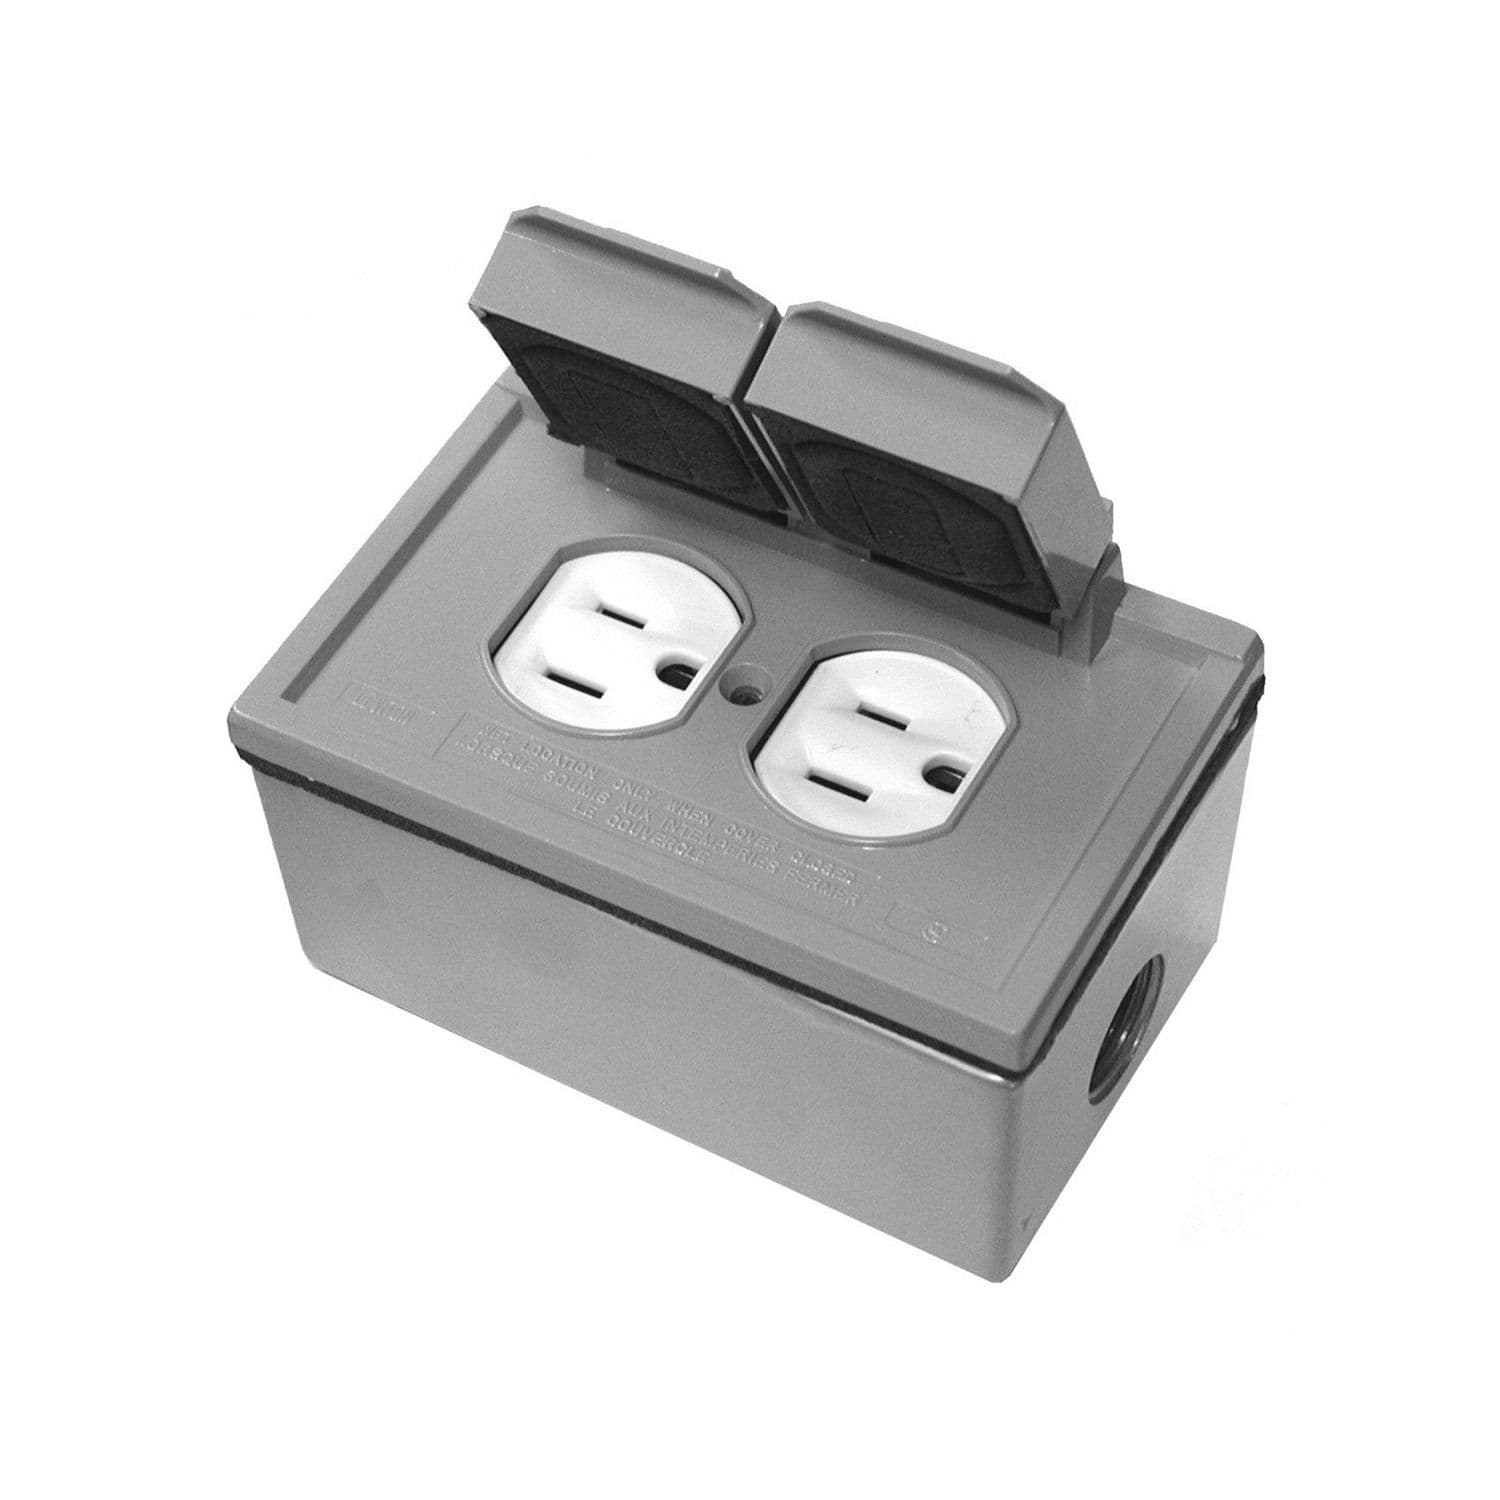 Thomas & Betts 37129-721 Vertical GFCI Outdoor Outlet Cover